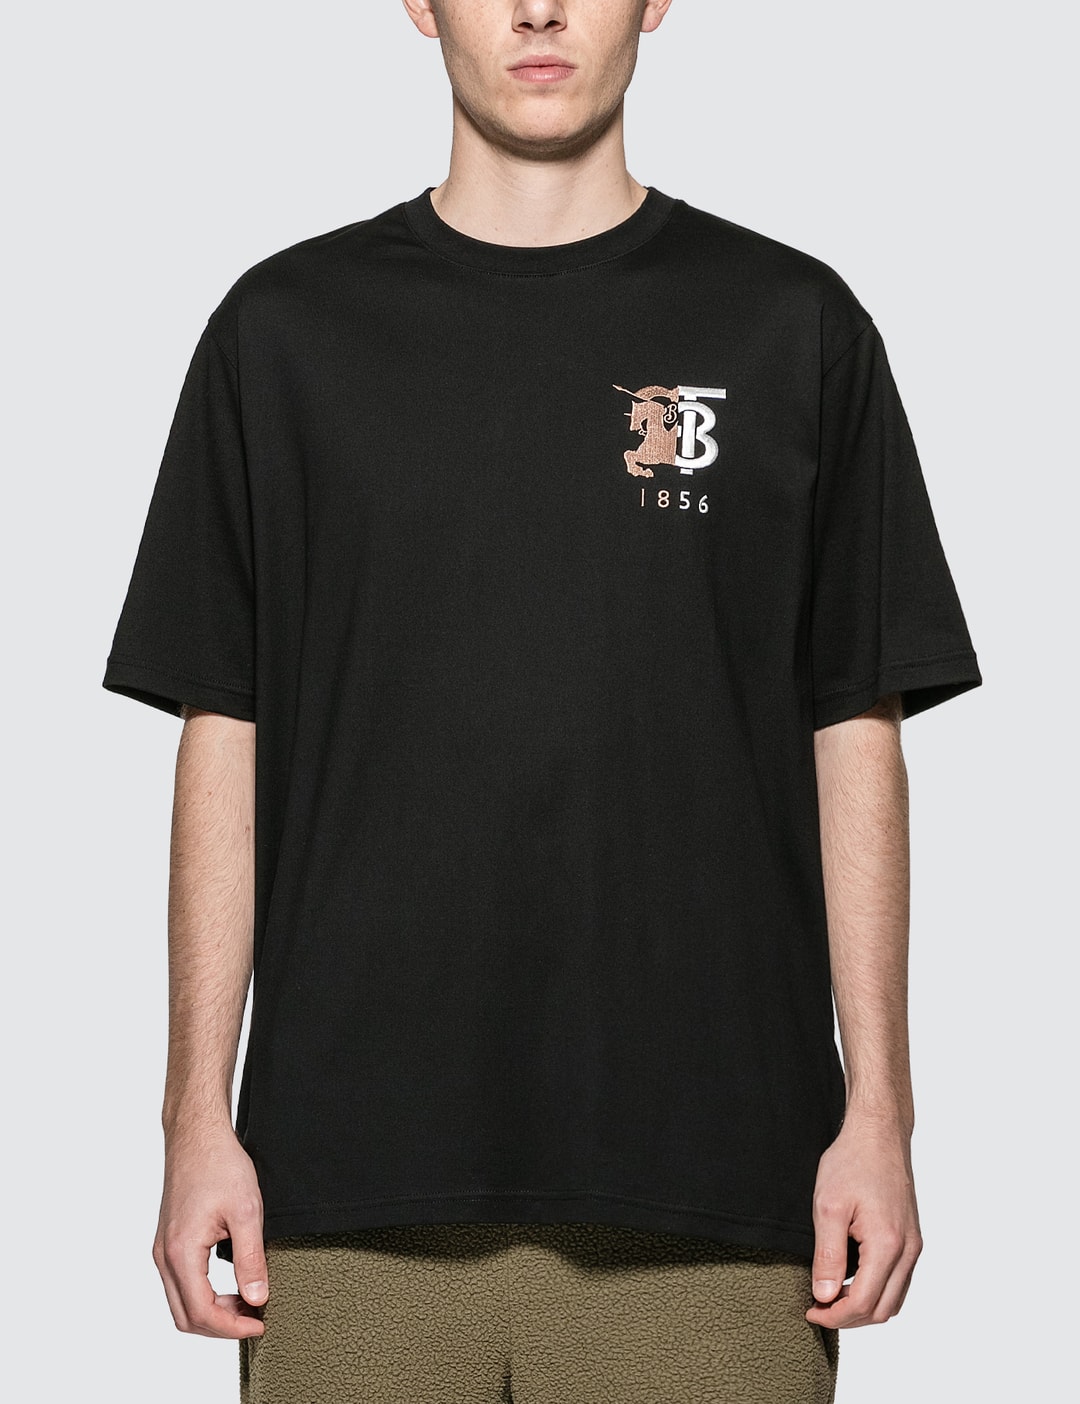 Burberry - 1856 Logo T-Shirt | HBX - Globally Curated Fashion and Lifestyle by Hypebeast